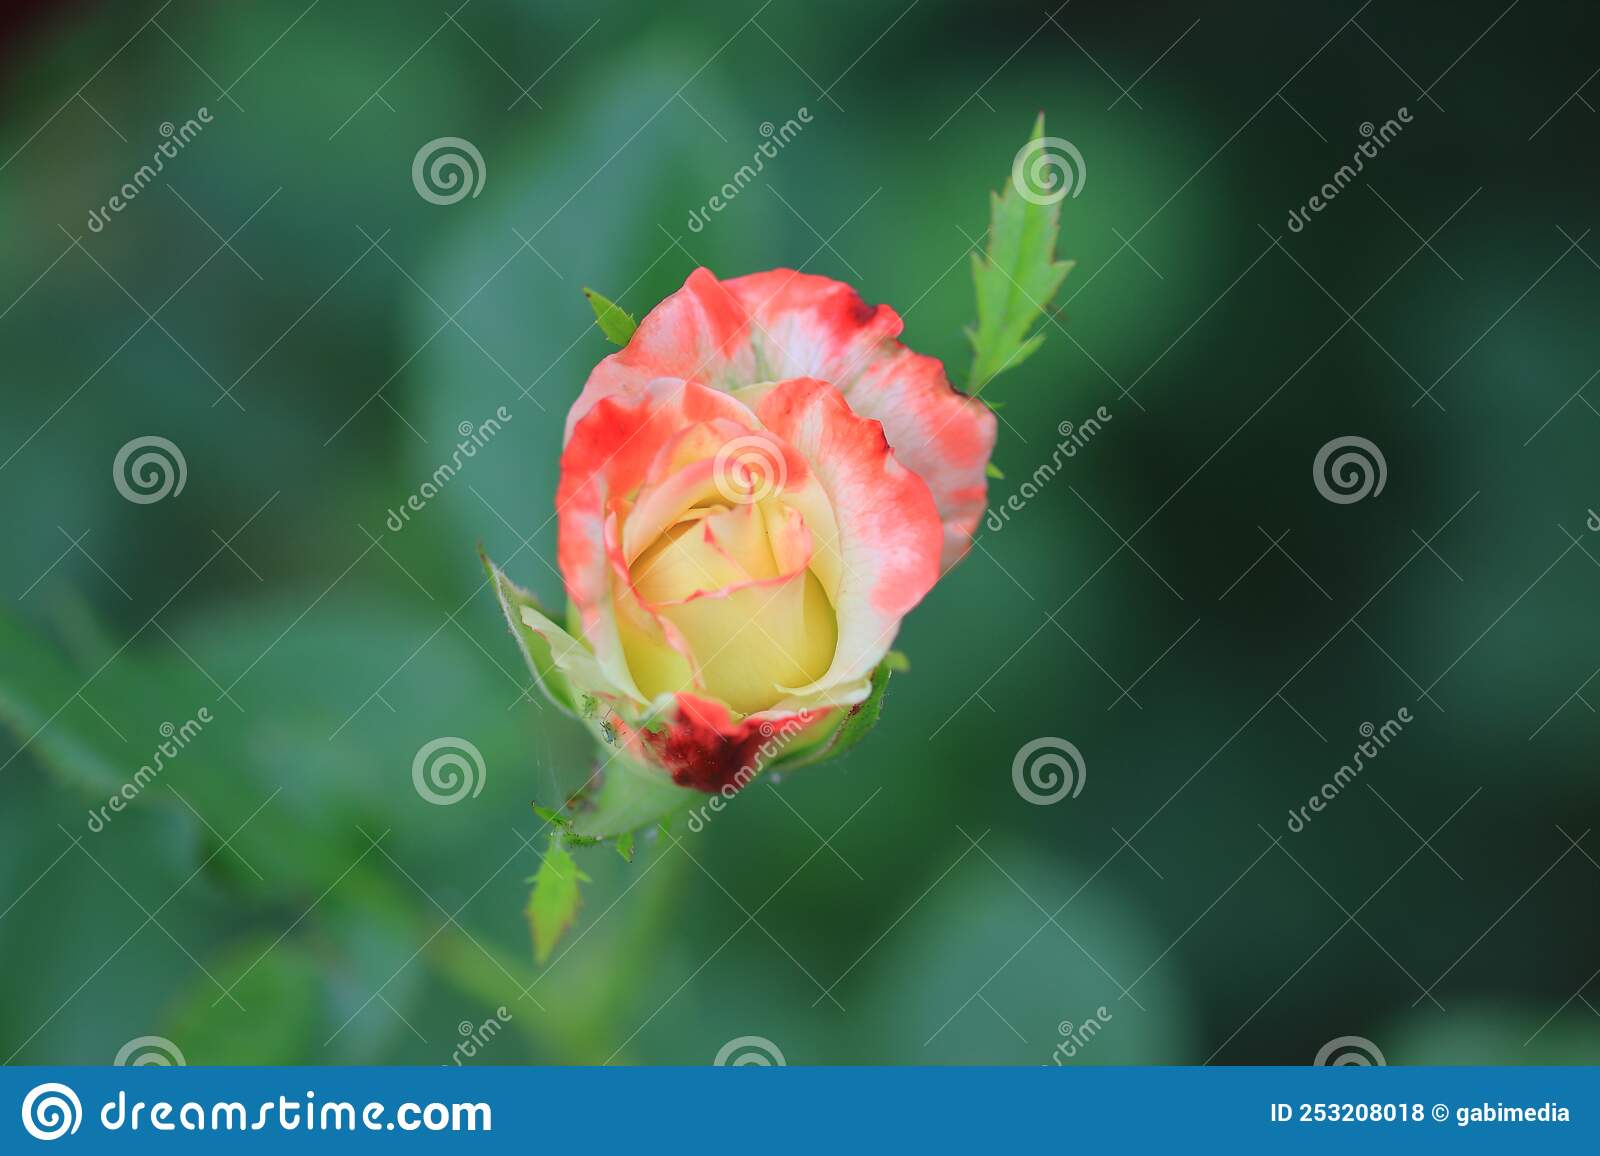 Close up - Beautiful red-yellow rose in a garden, blurred background